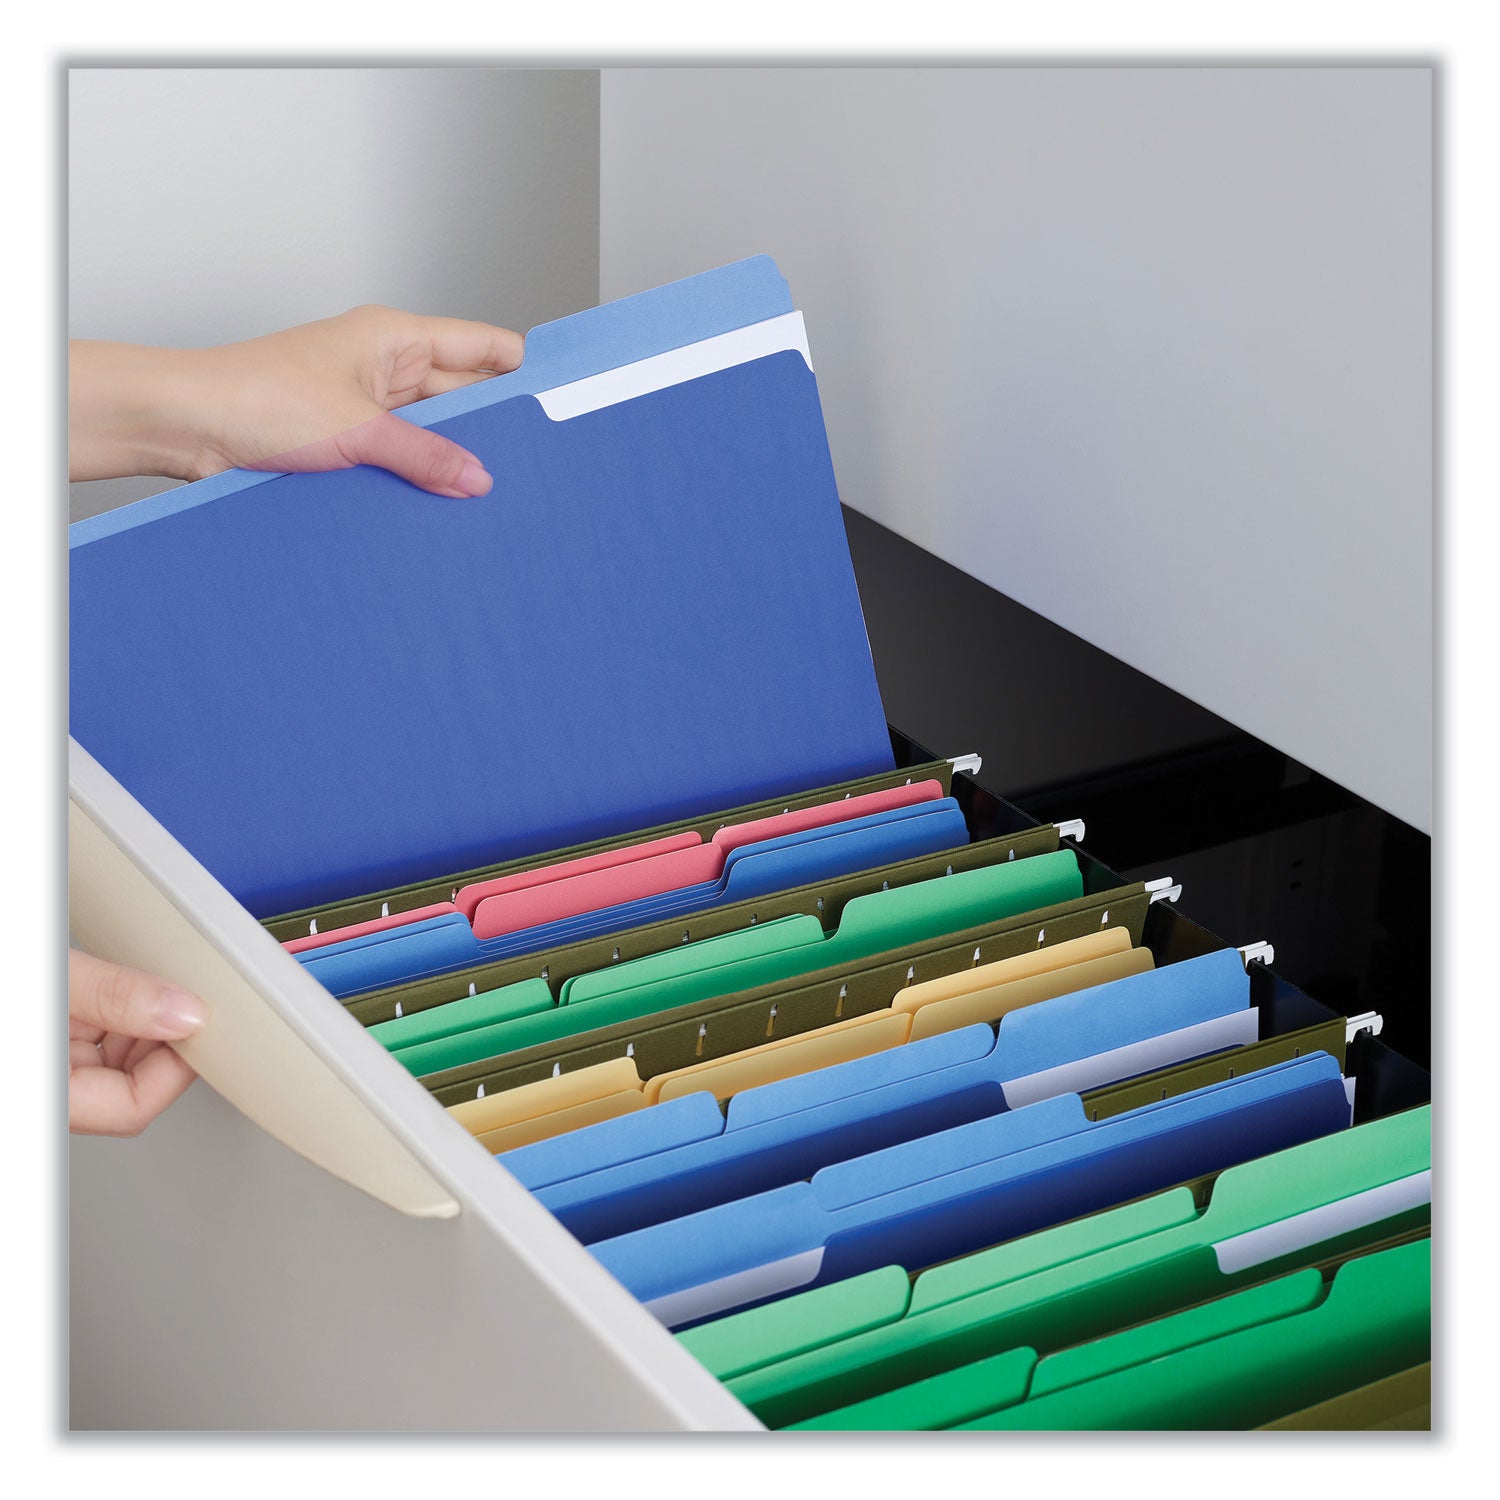 Interior File Folders, 1/3-Cut Tabs: Assorted, Letter Size, 11-pt Stock, Blue, 100/Box - 